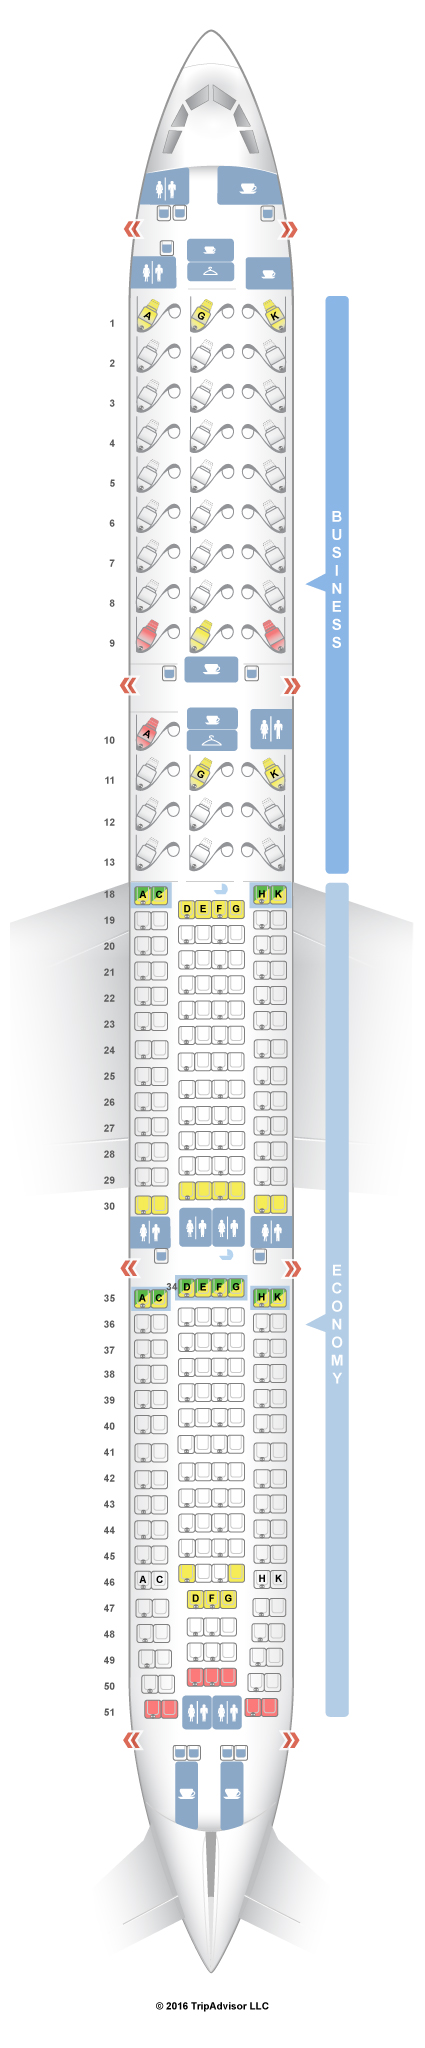 Aer Lingus A330 300 Seating Chart